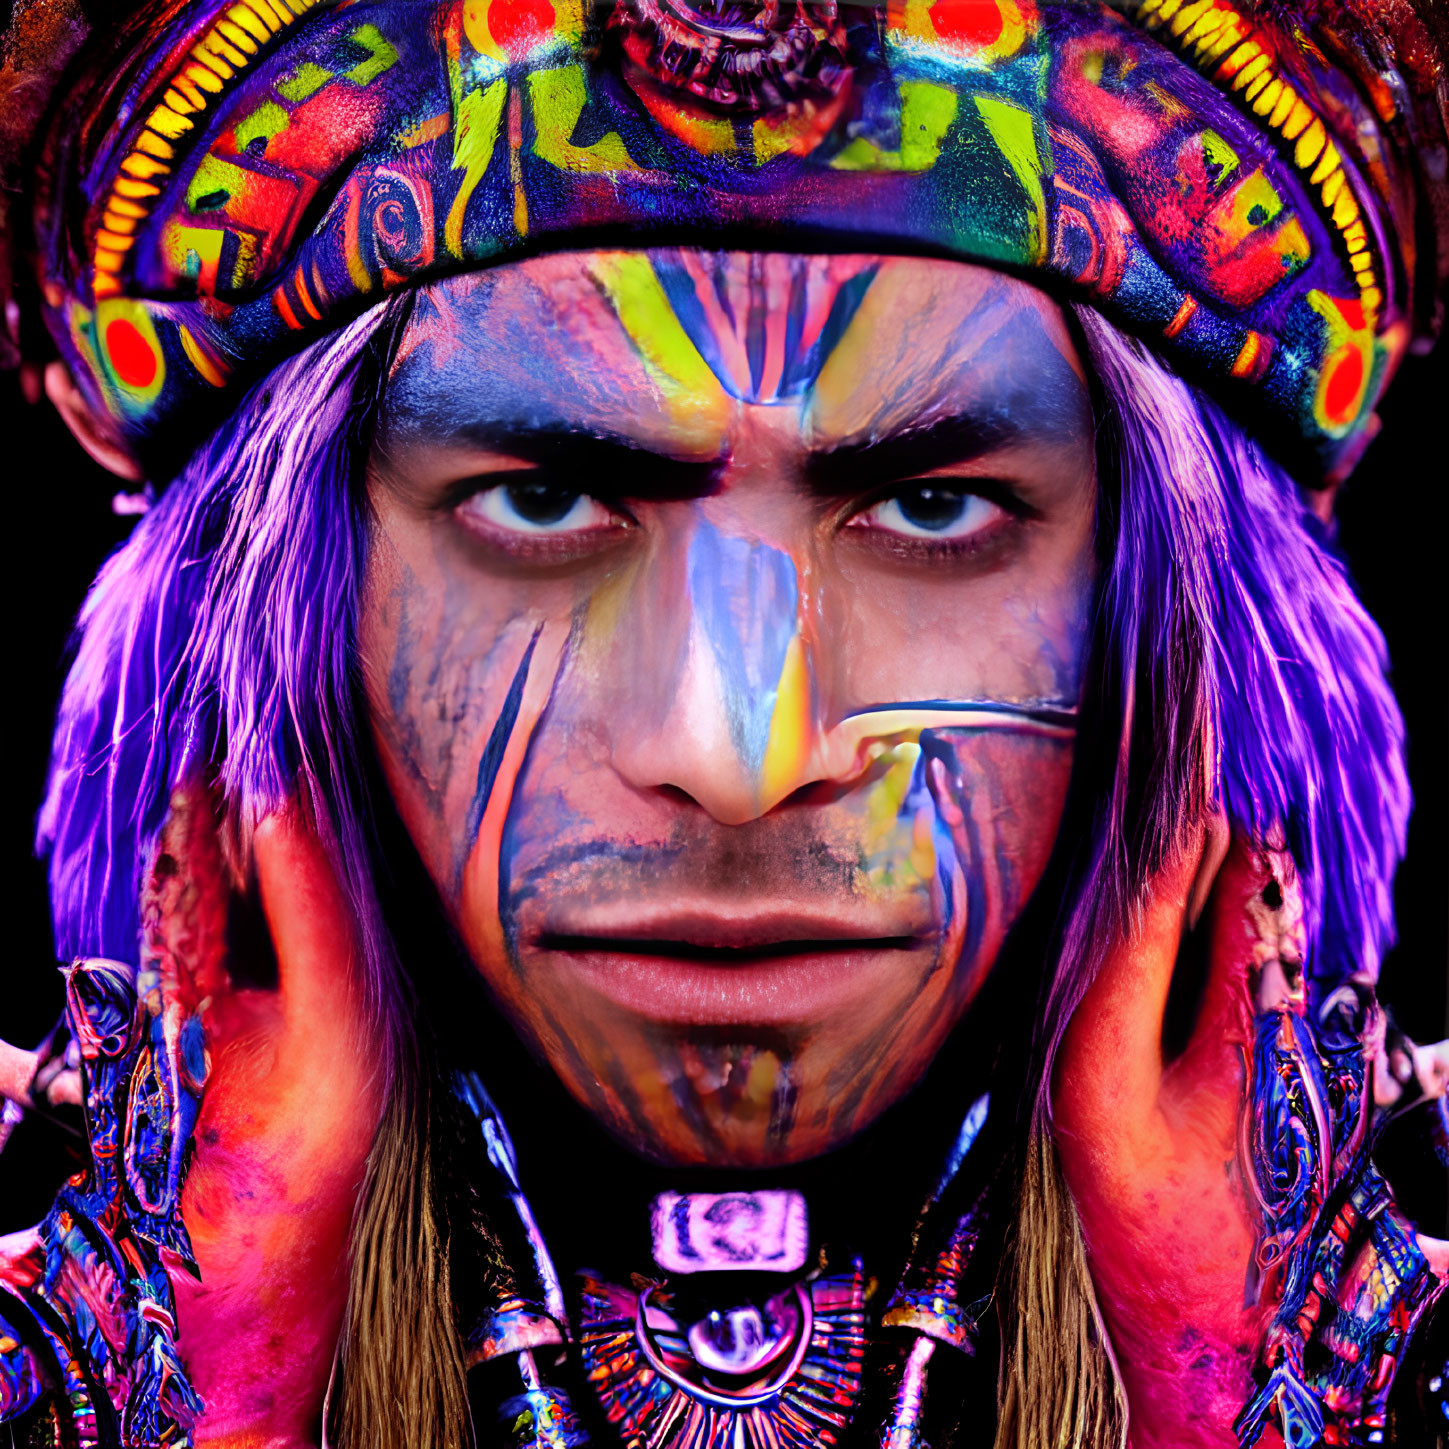 Intense stare of person with vibrant tribal face paint and headgear